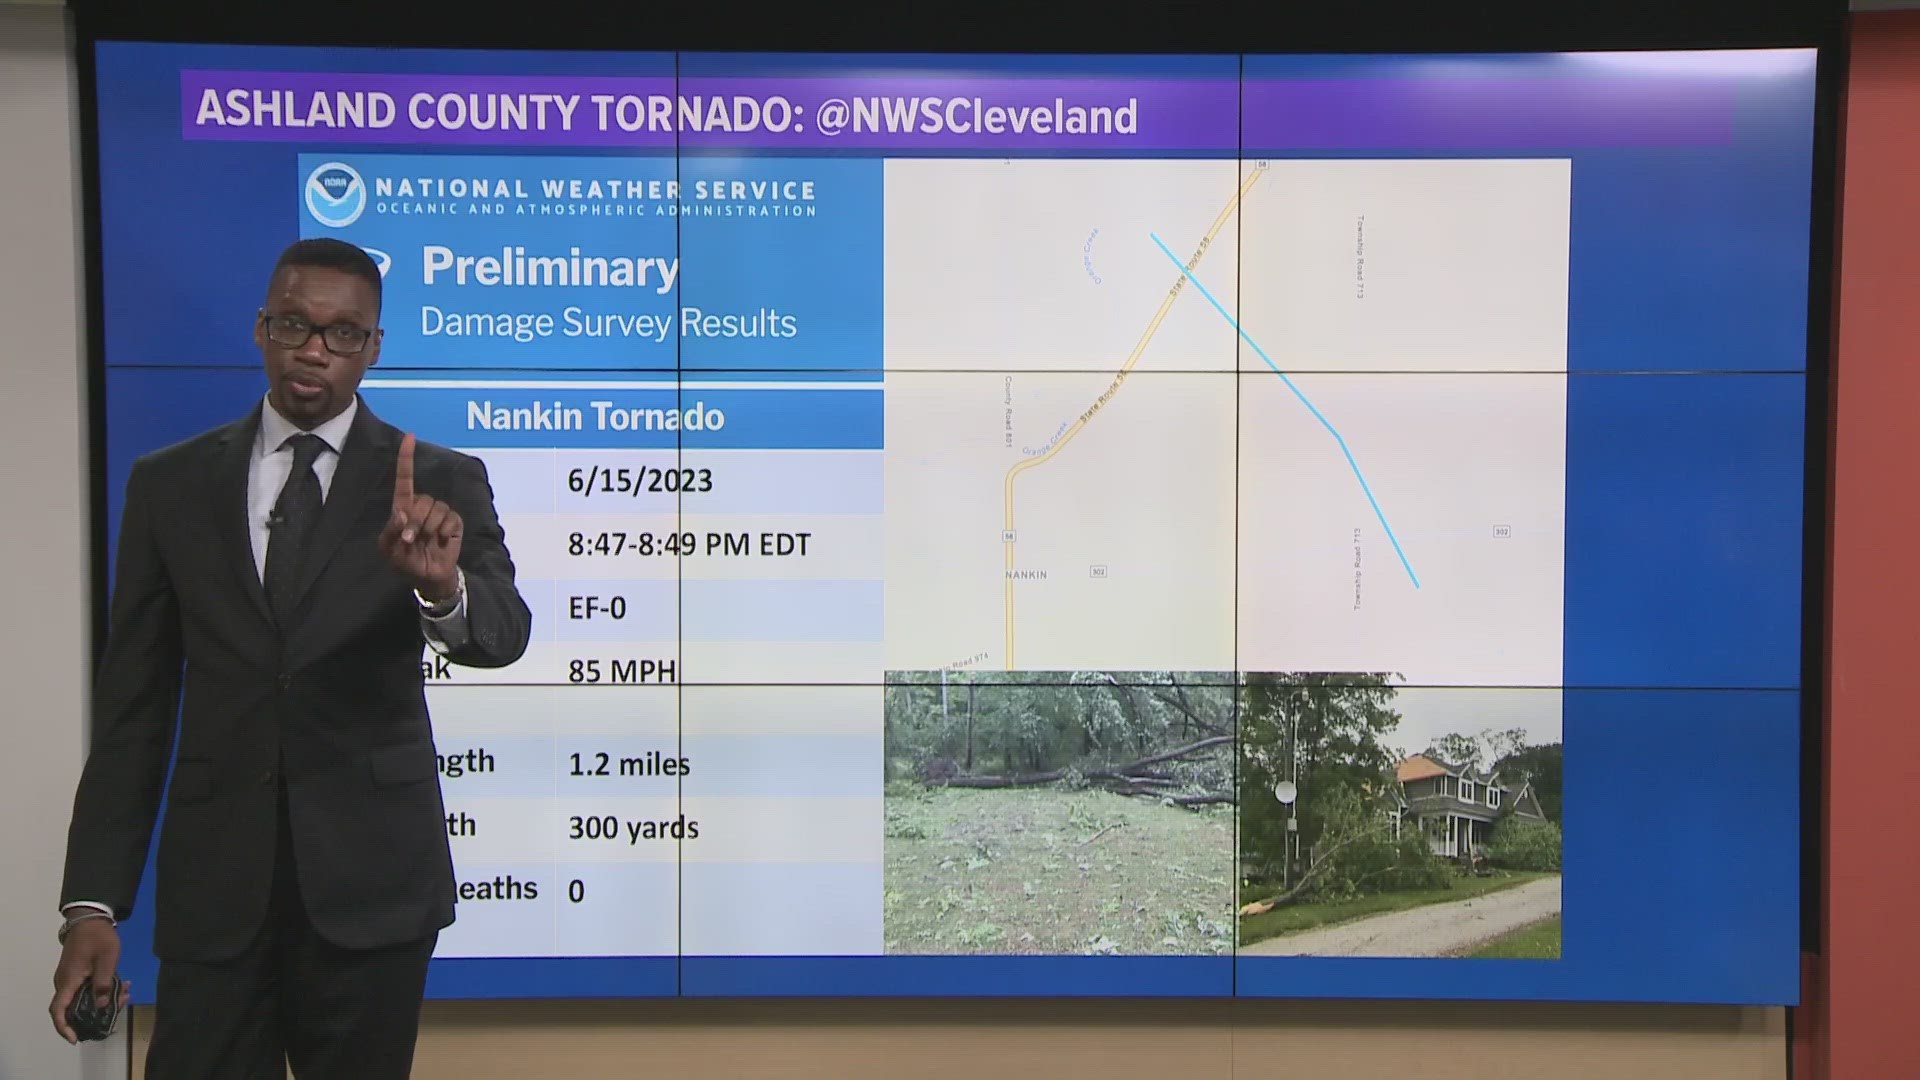 The National Weather Service confirmed an EF-0 tornado touched down in Ashland County.